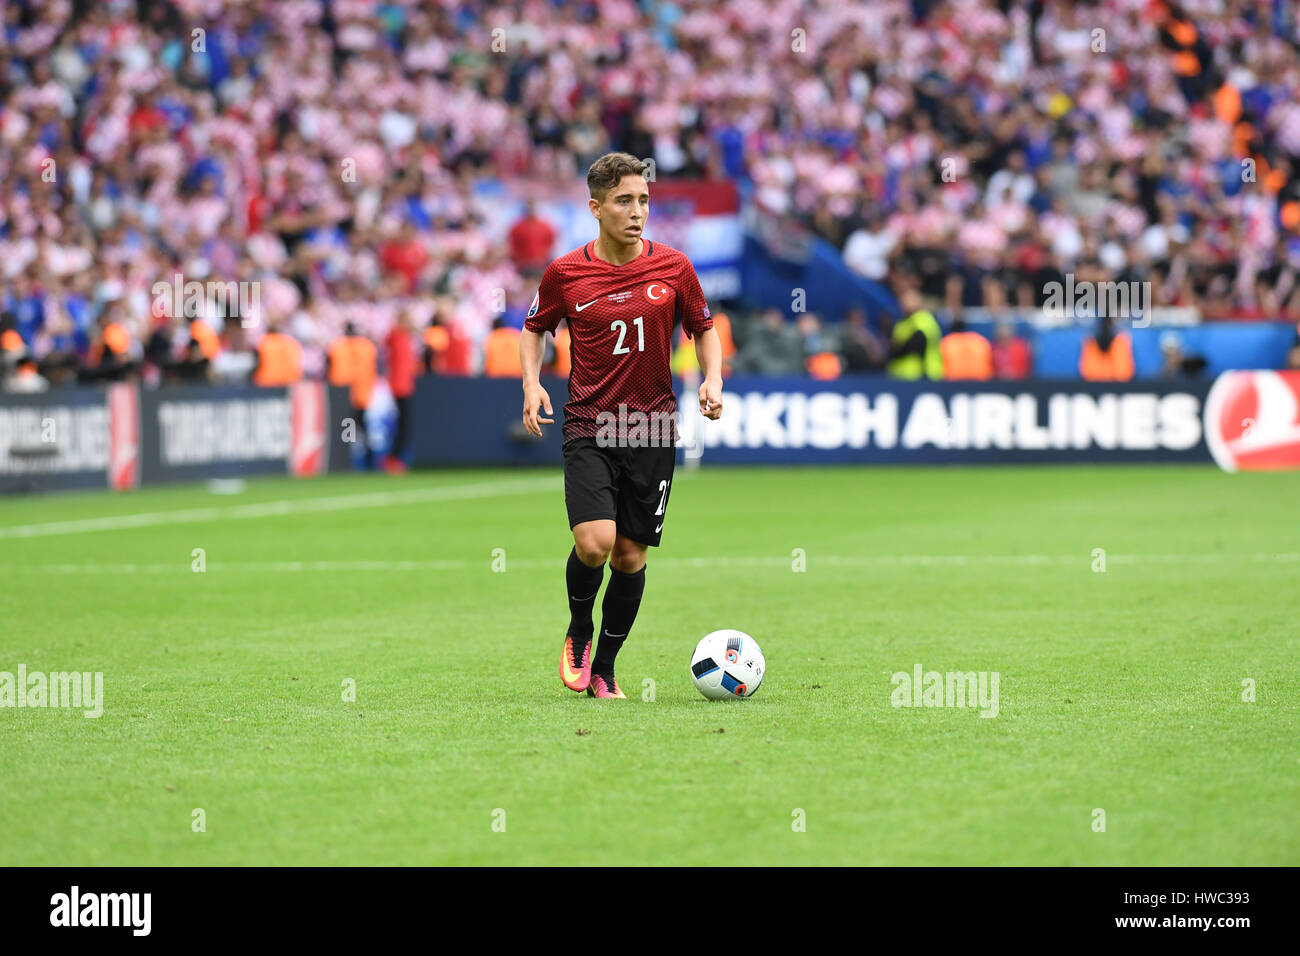 Turkish Midfielder Emre Mor in the Euro 2016 Group Stage match between Turkey vs Crotia in Parc des Princes Stadium on June12, 2016, Paris, France Stock Photo